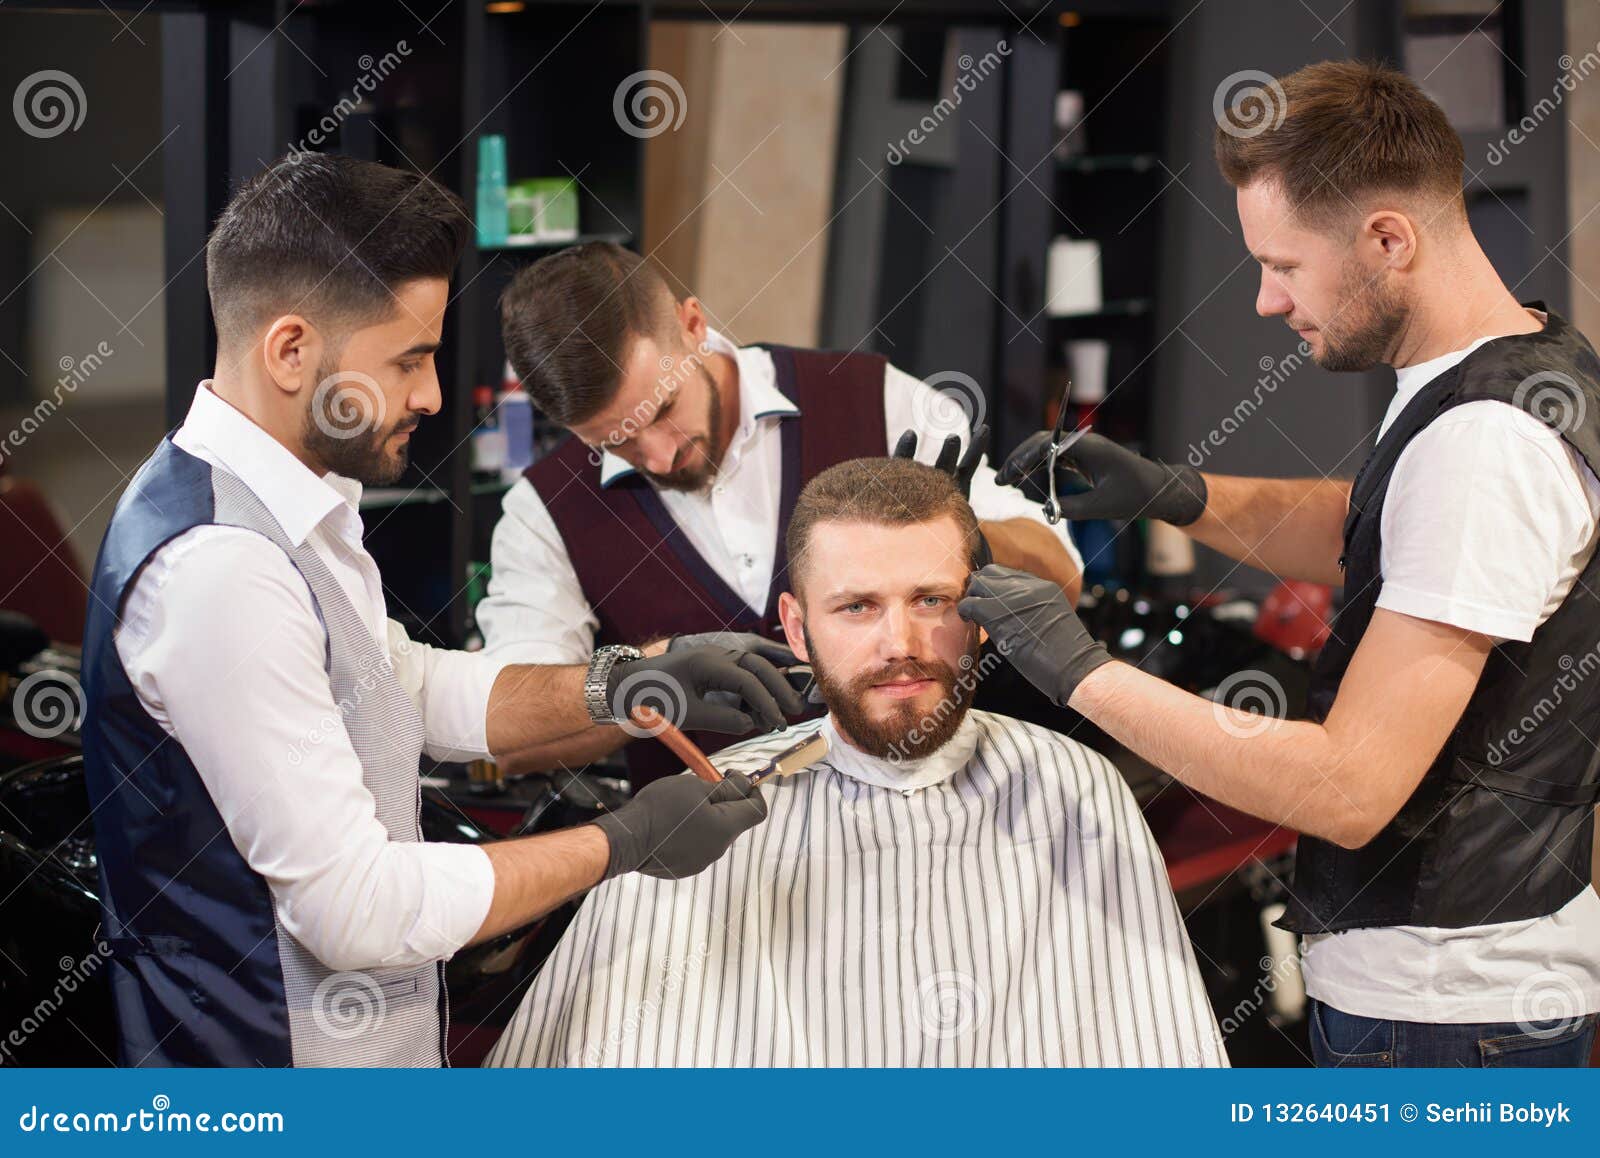 Male Sitting In Chair While Hairdressers Servicing Him Stock Image